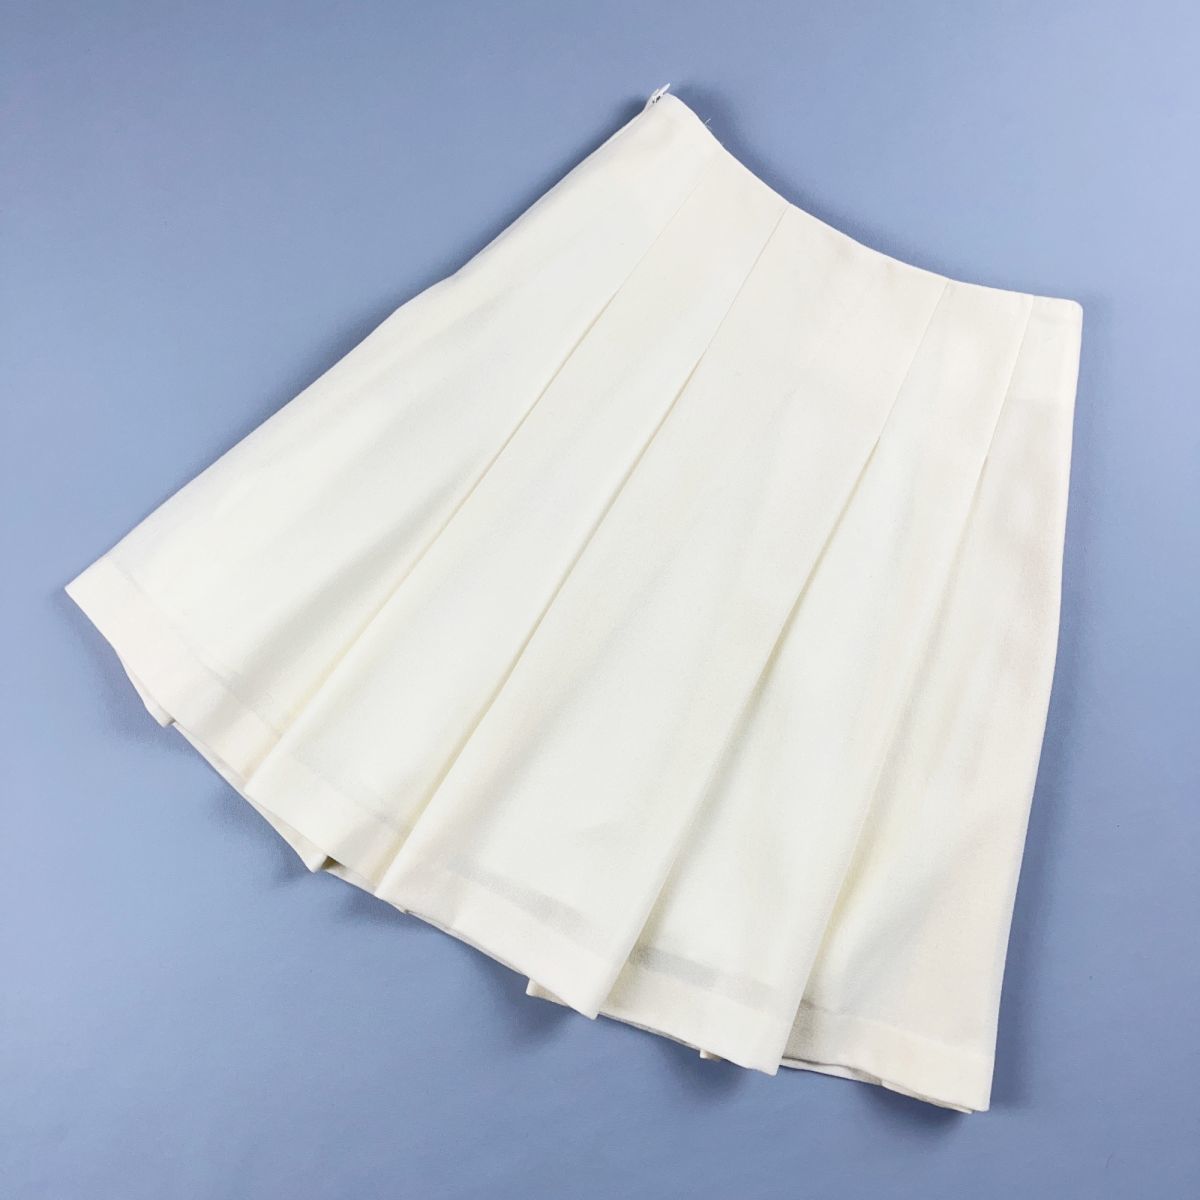  beautiful goods Ballsey Tomorrowland wool 100% pleat flair skirt knees height lining equipped lady's bottoms white ivory size 36*GC343